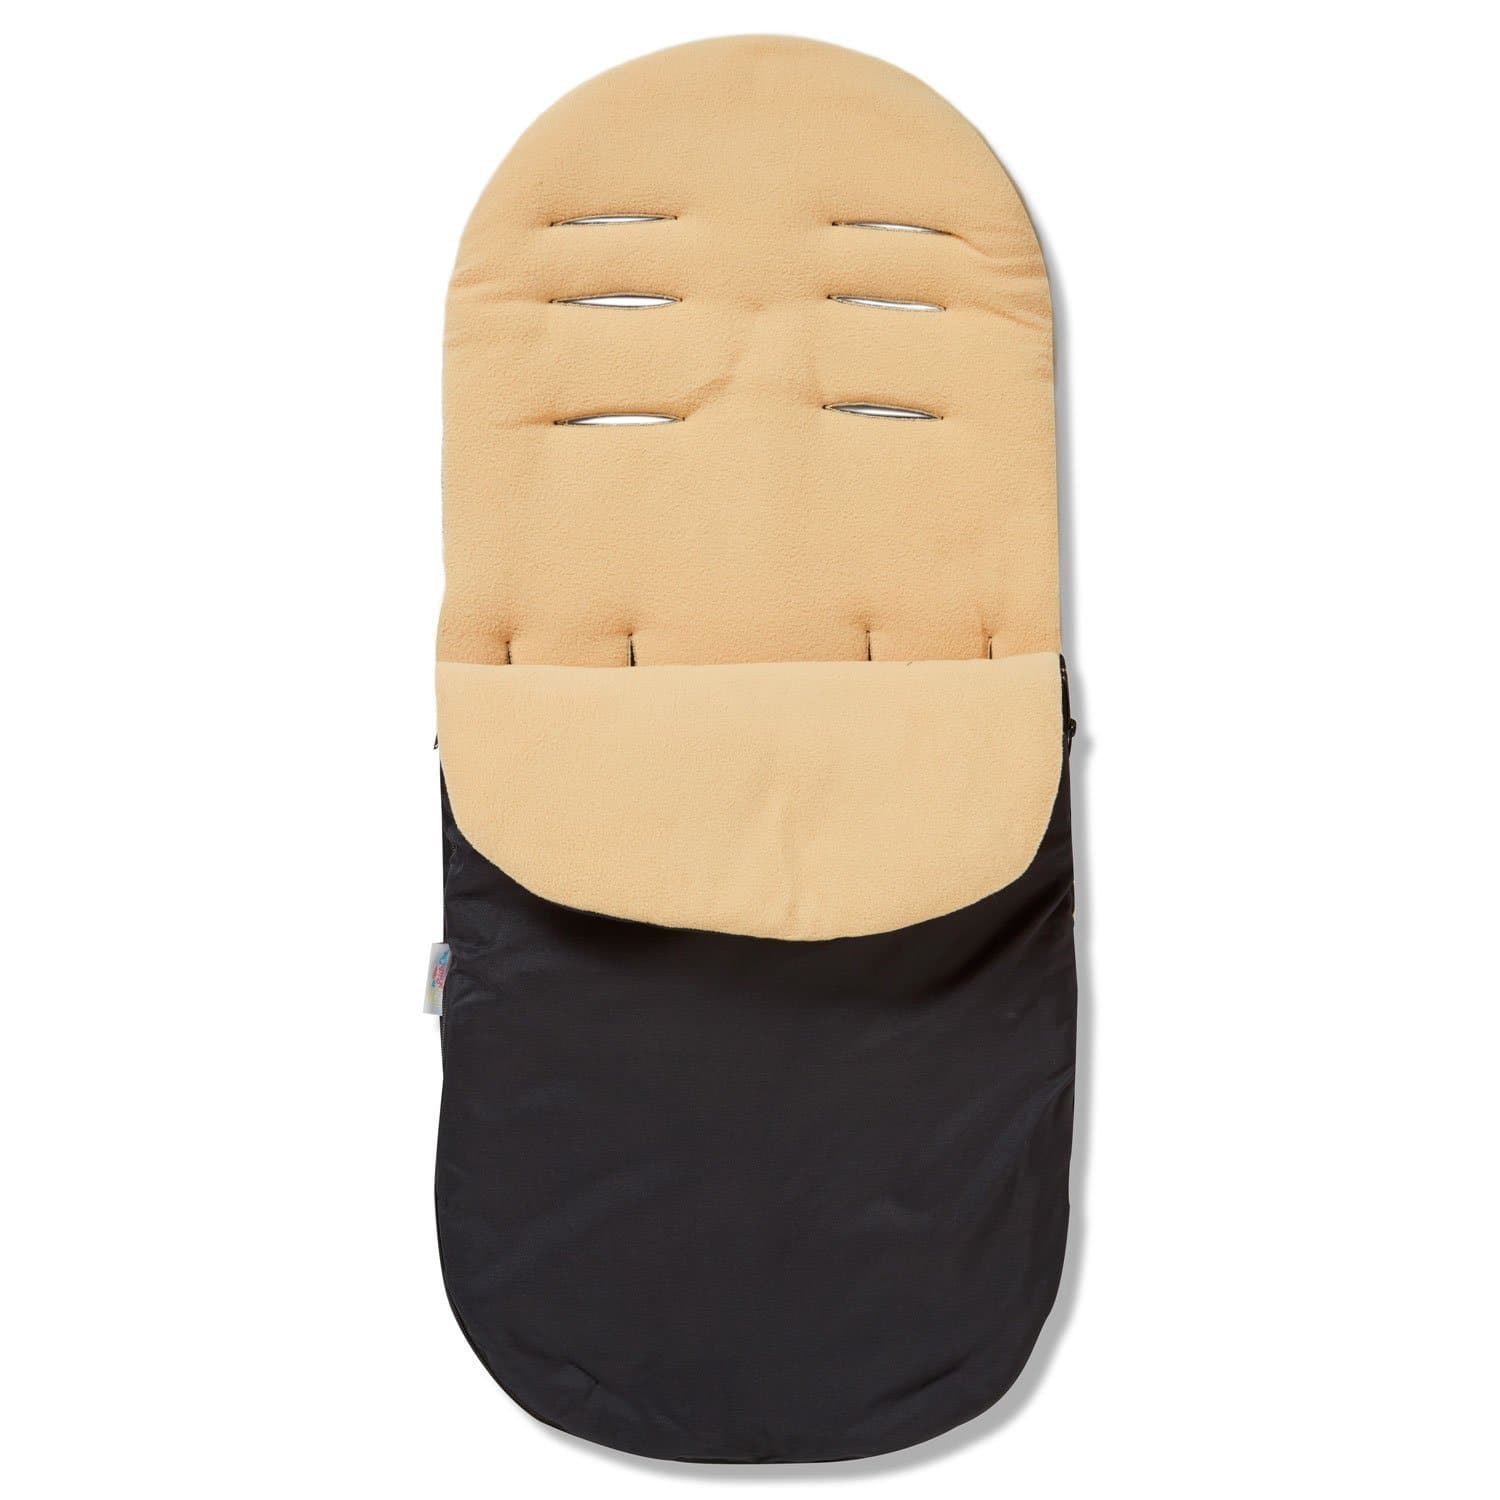 Footmuff / Cosy Toes Compatible with Bloom - For Your Little One